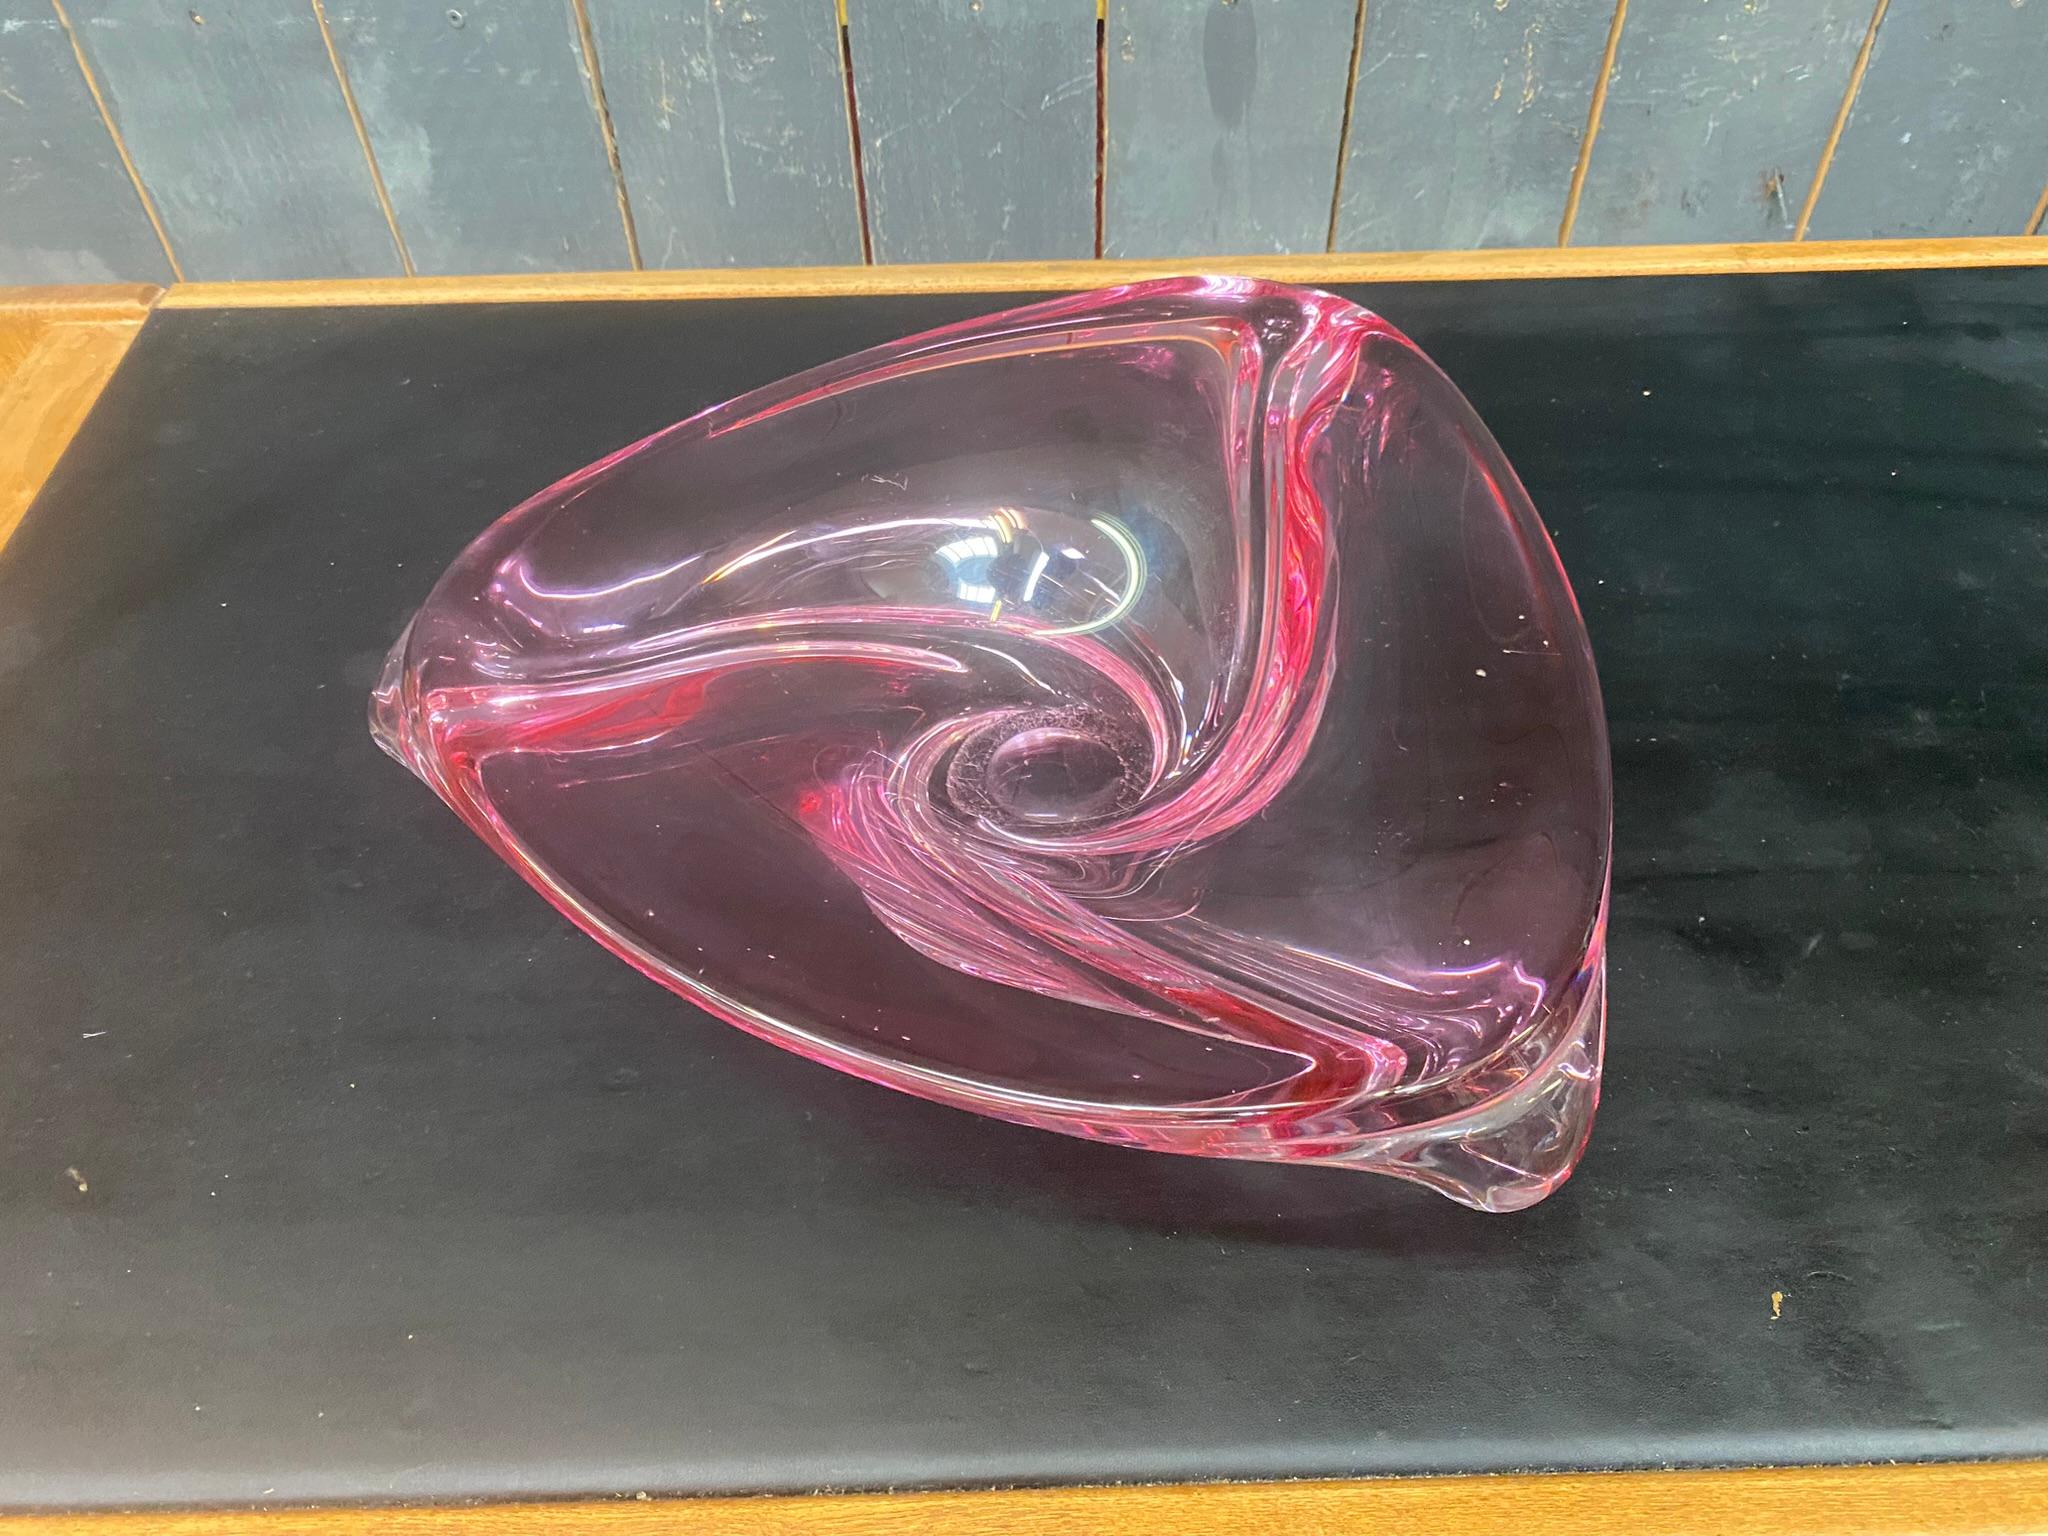 Stylish purple Glass Bowl / Centerpiece by Murano Glass
the color is transparent purple/pink
the black side is the color of the tray below